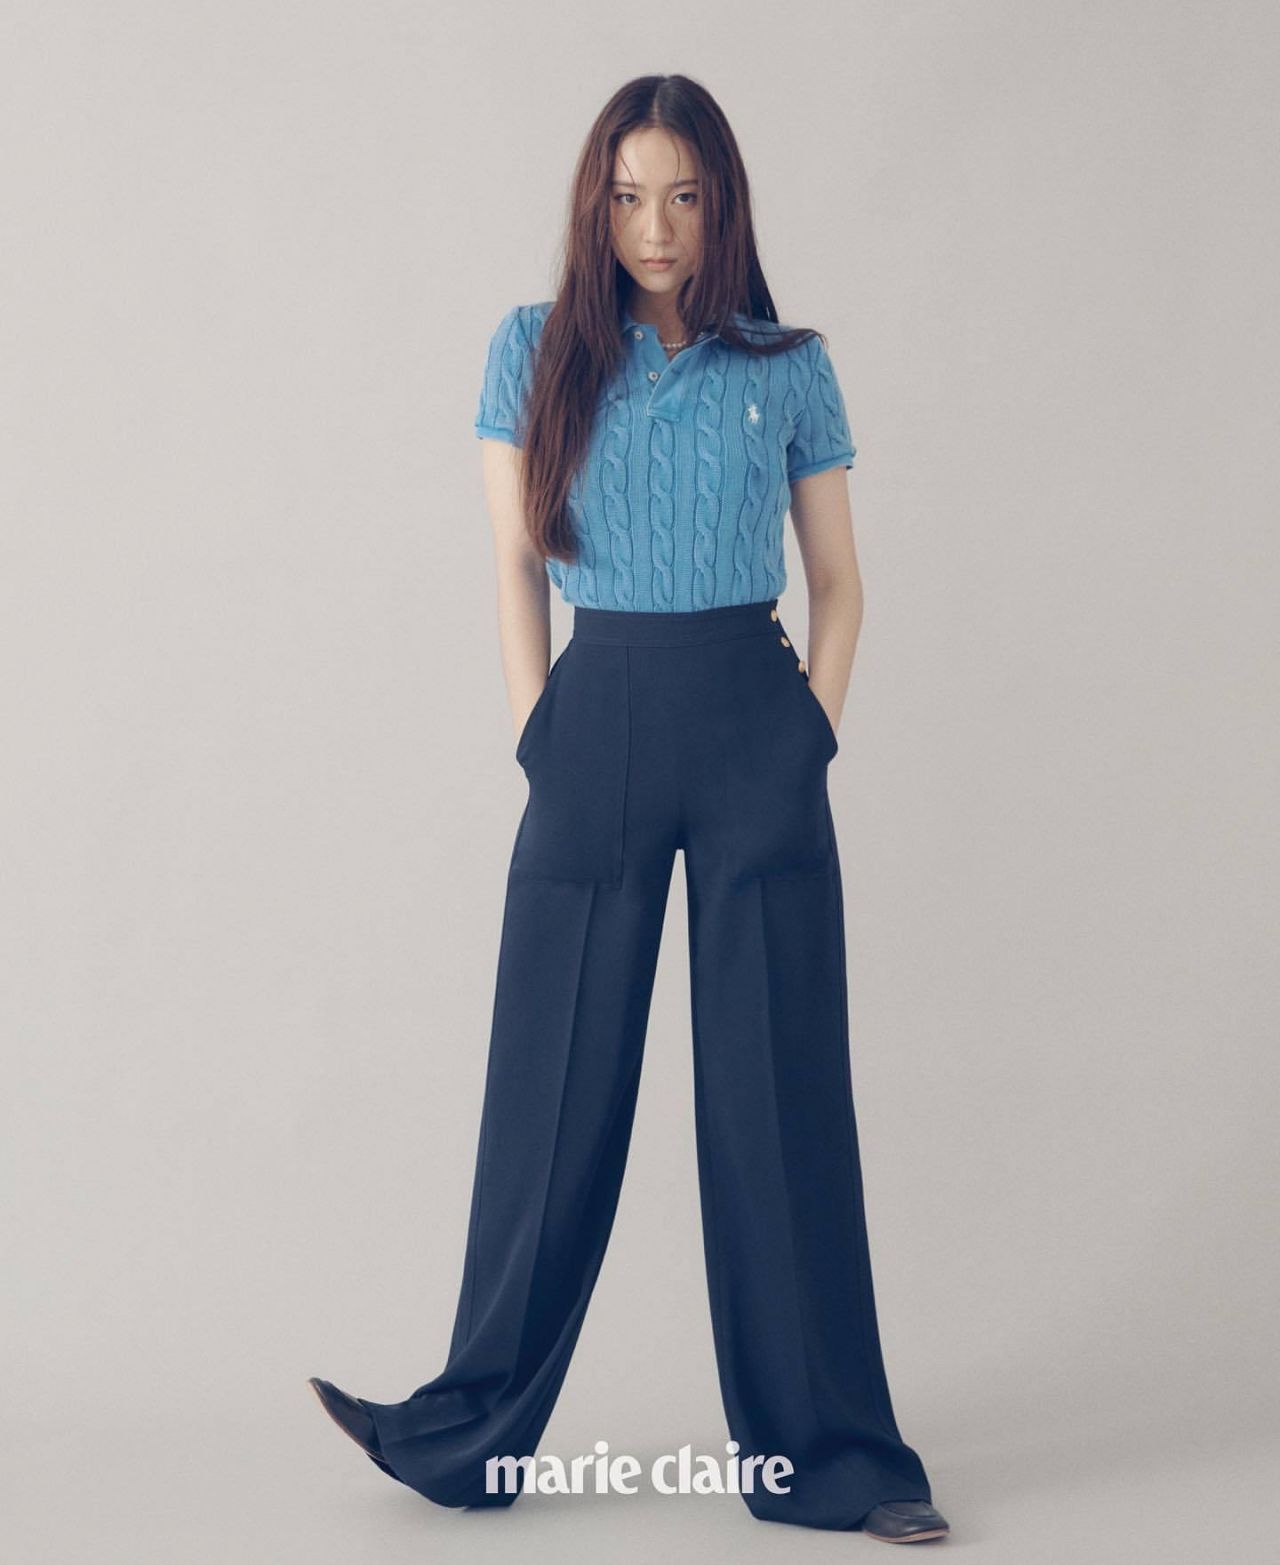 Krystal Jung in Polo Ralph Lauren - Photoshoot Marie Claire Magazine ...